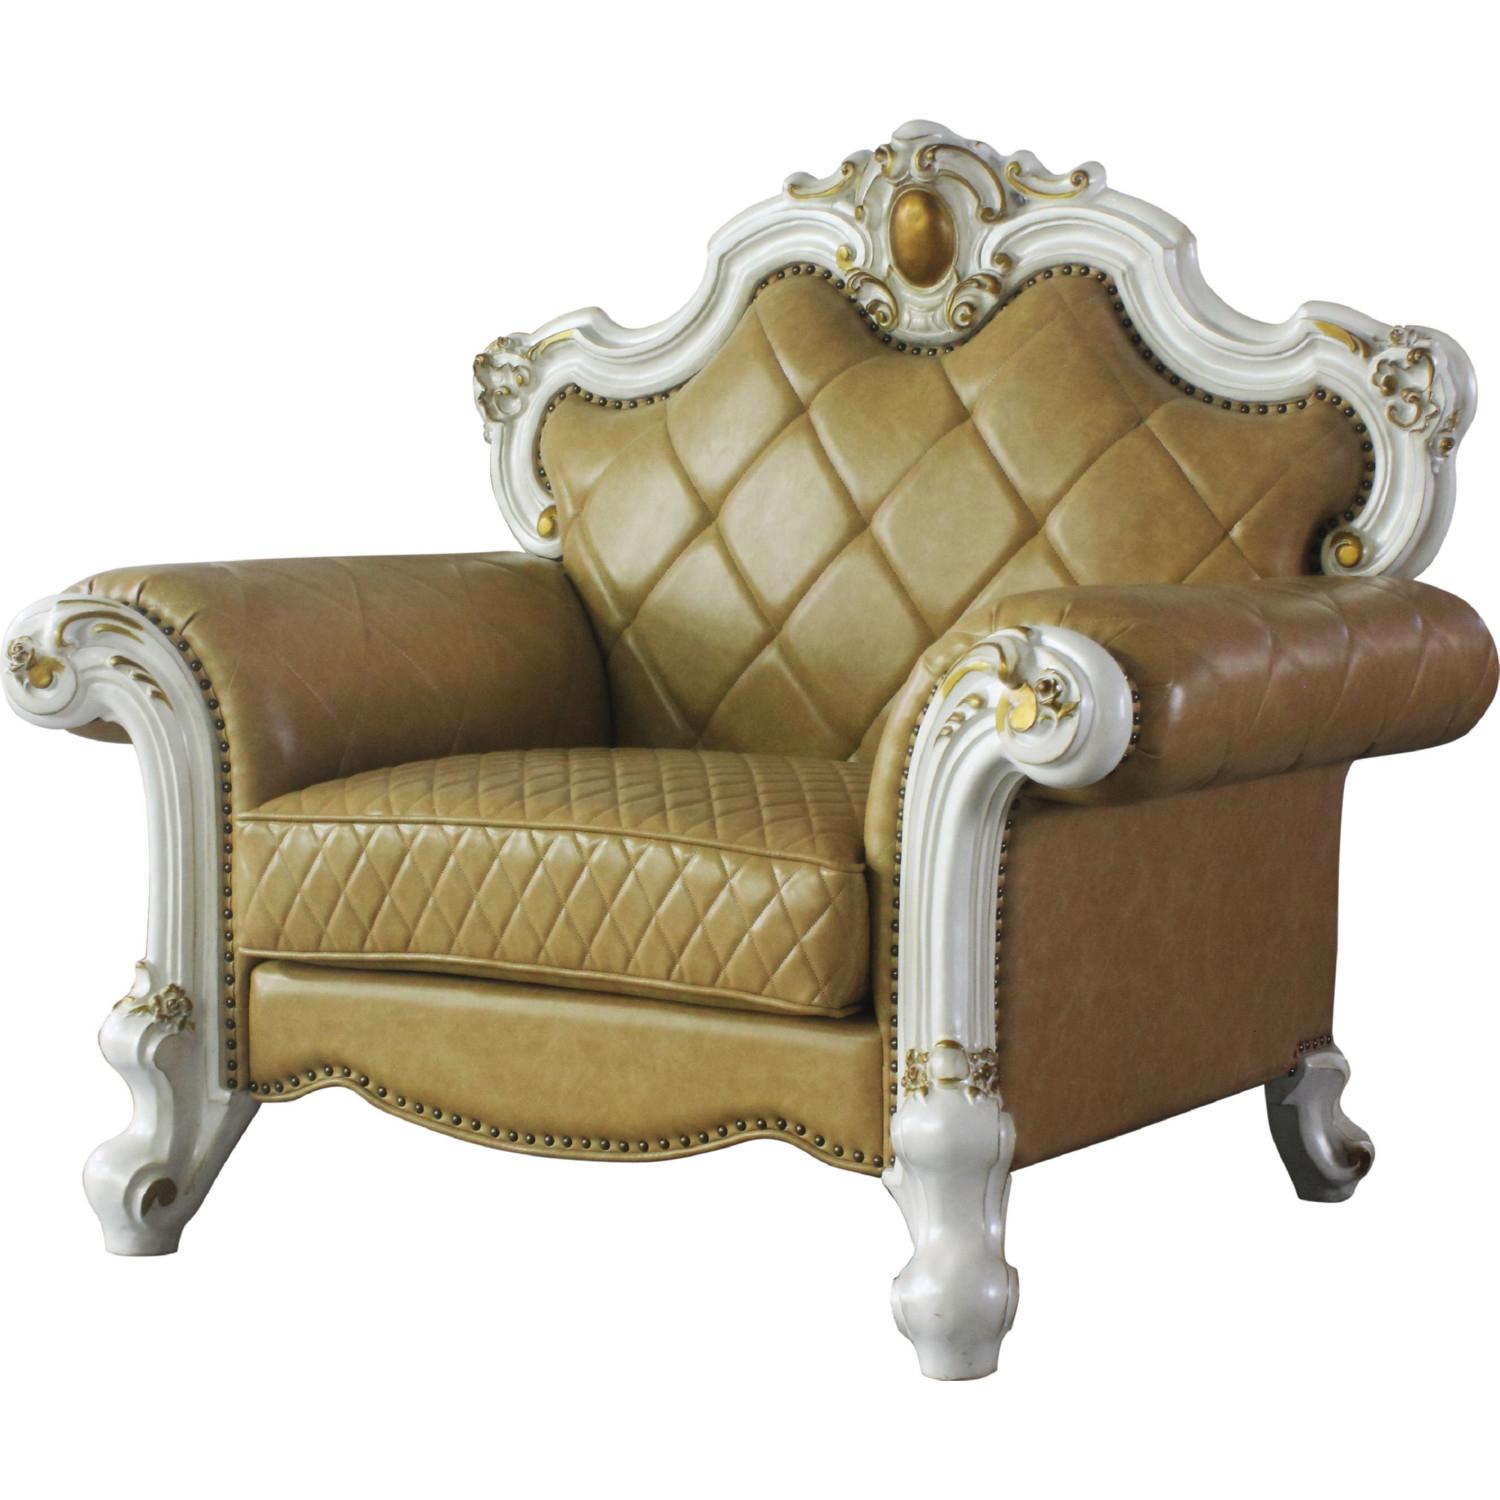 Classic, Traditional Arm Chair Picardy 58212 58212- Picardy in Pearl, Antique, Yellow PU